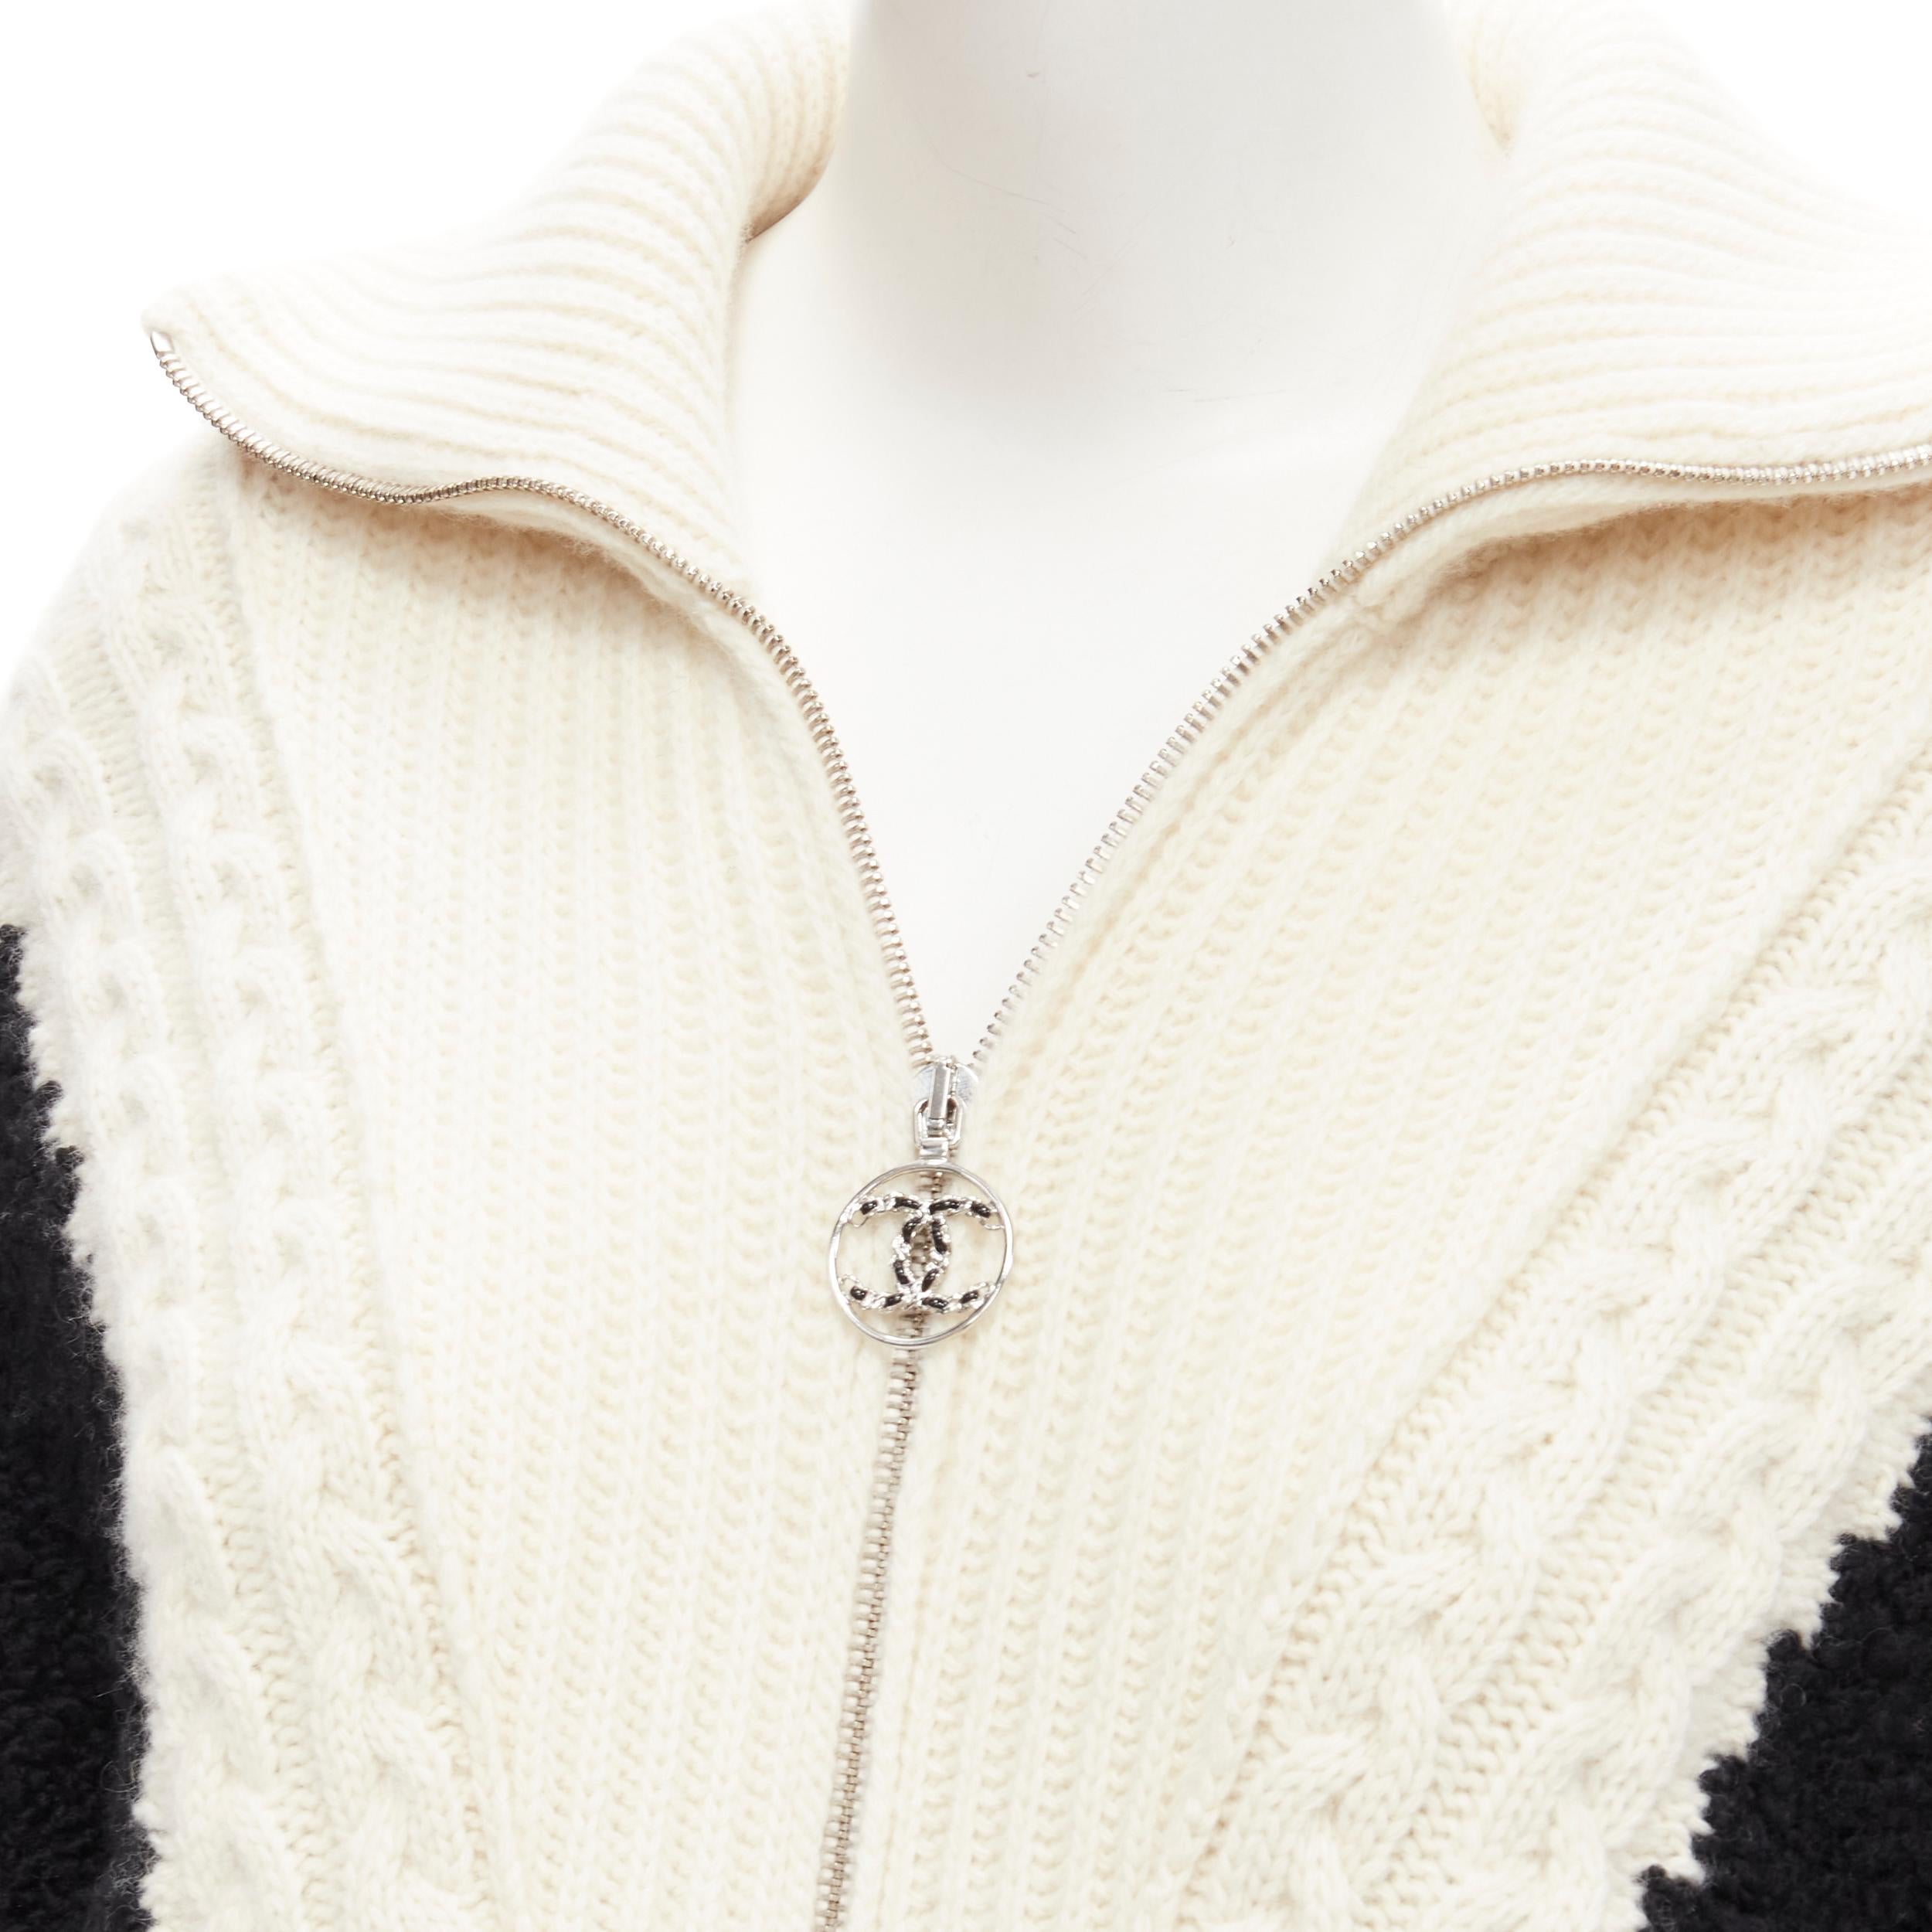 CHANEL black boucle cream cable knit faux layered cardigan jacket FR34 XS
Brand: Chanel
Material: Wool
Color: Black
Pattern: Solid
Closure: Zip
Extra Detail: Designed to look like a jacket was worn over a turtleneck knit. Cream chunky cable knit.